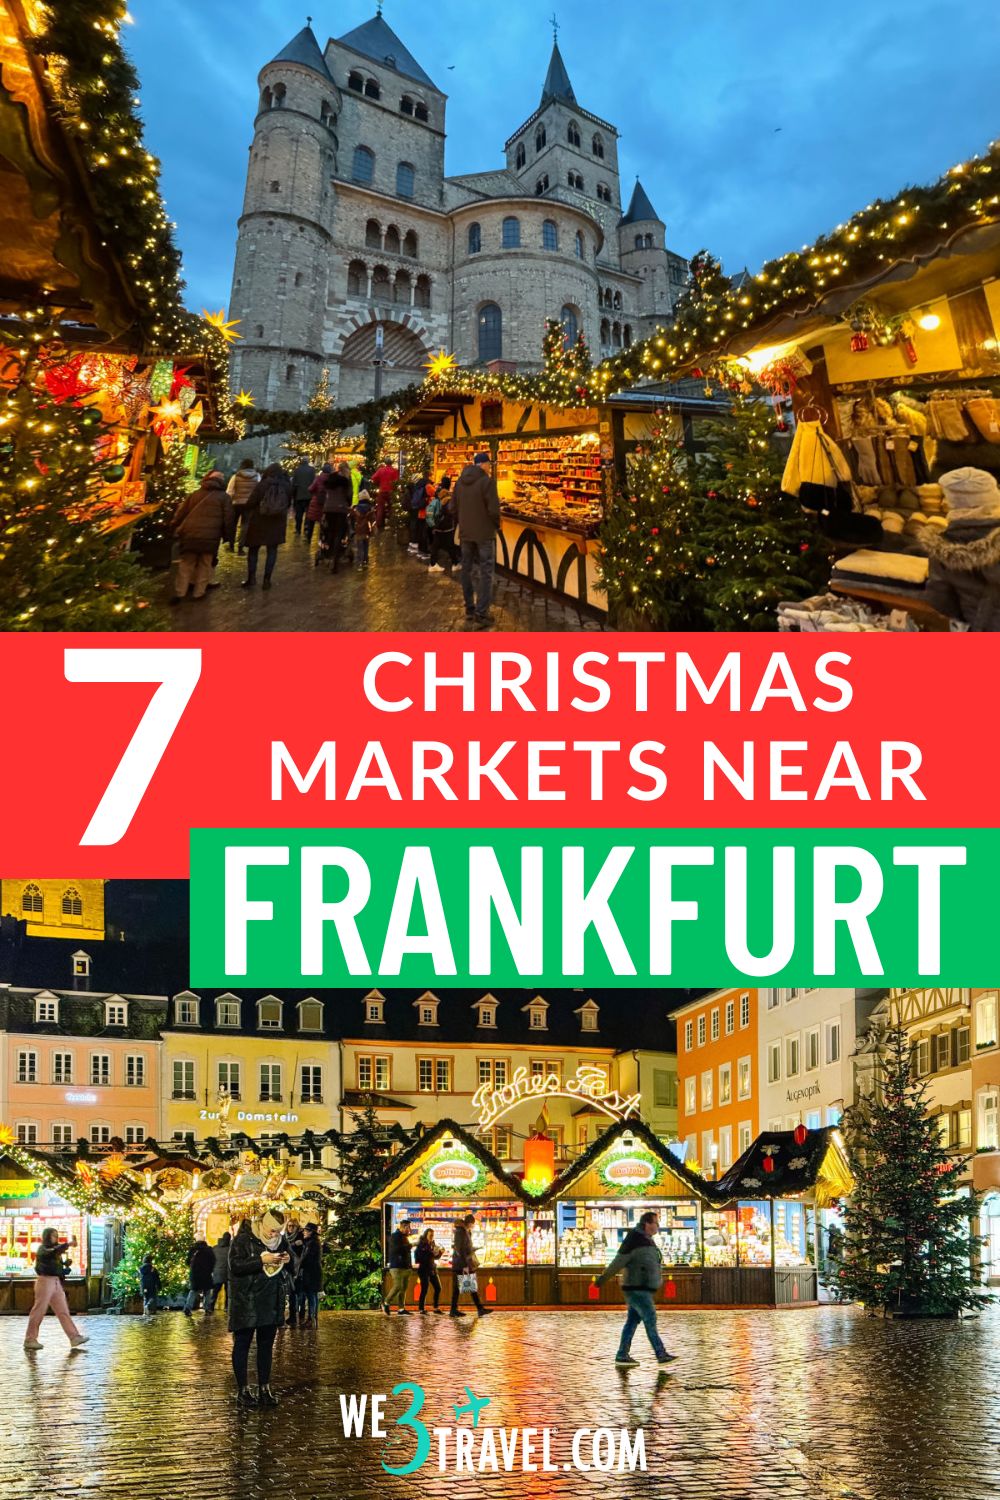 Capture the magic of Christmas at these enchanting German Christmas Markets near Frankfurt. Plan your trip to Germany for next Christmas vacation and experience the European christmas markets for yourself.